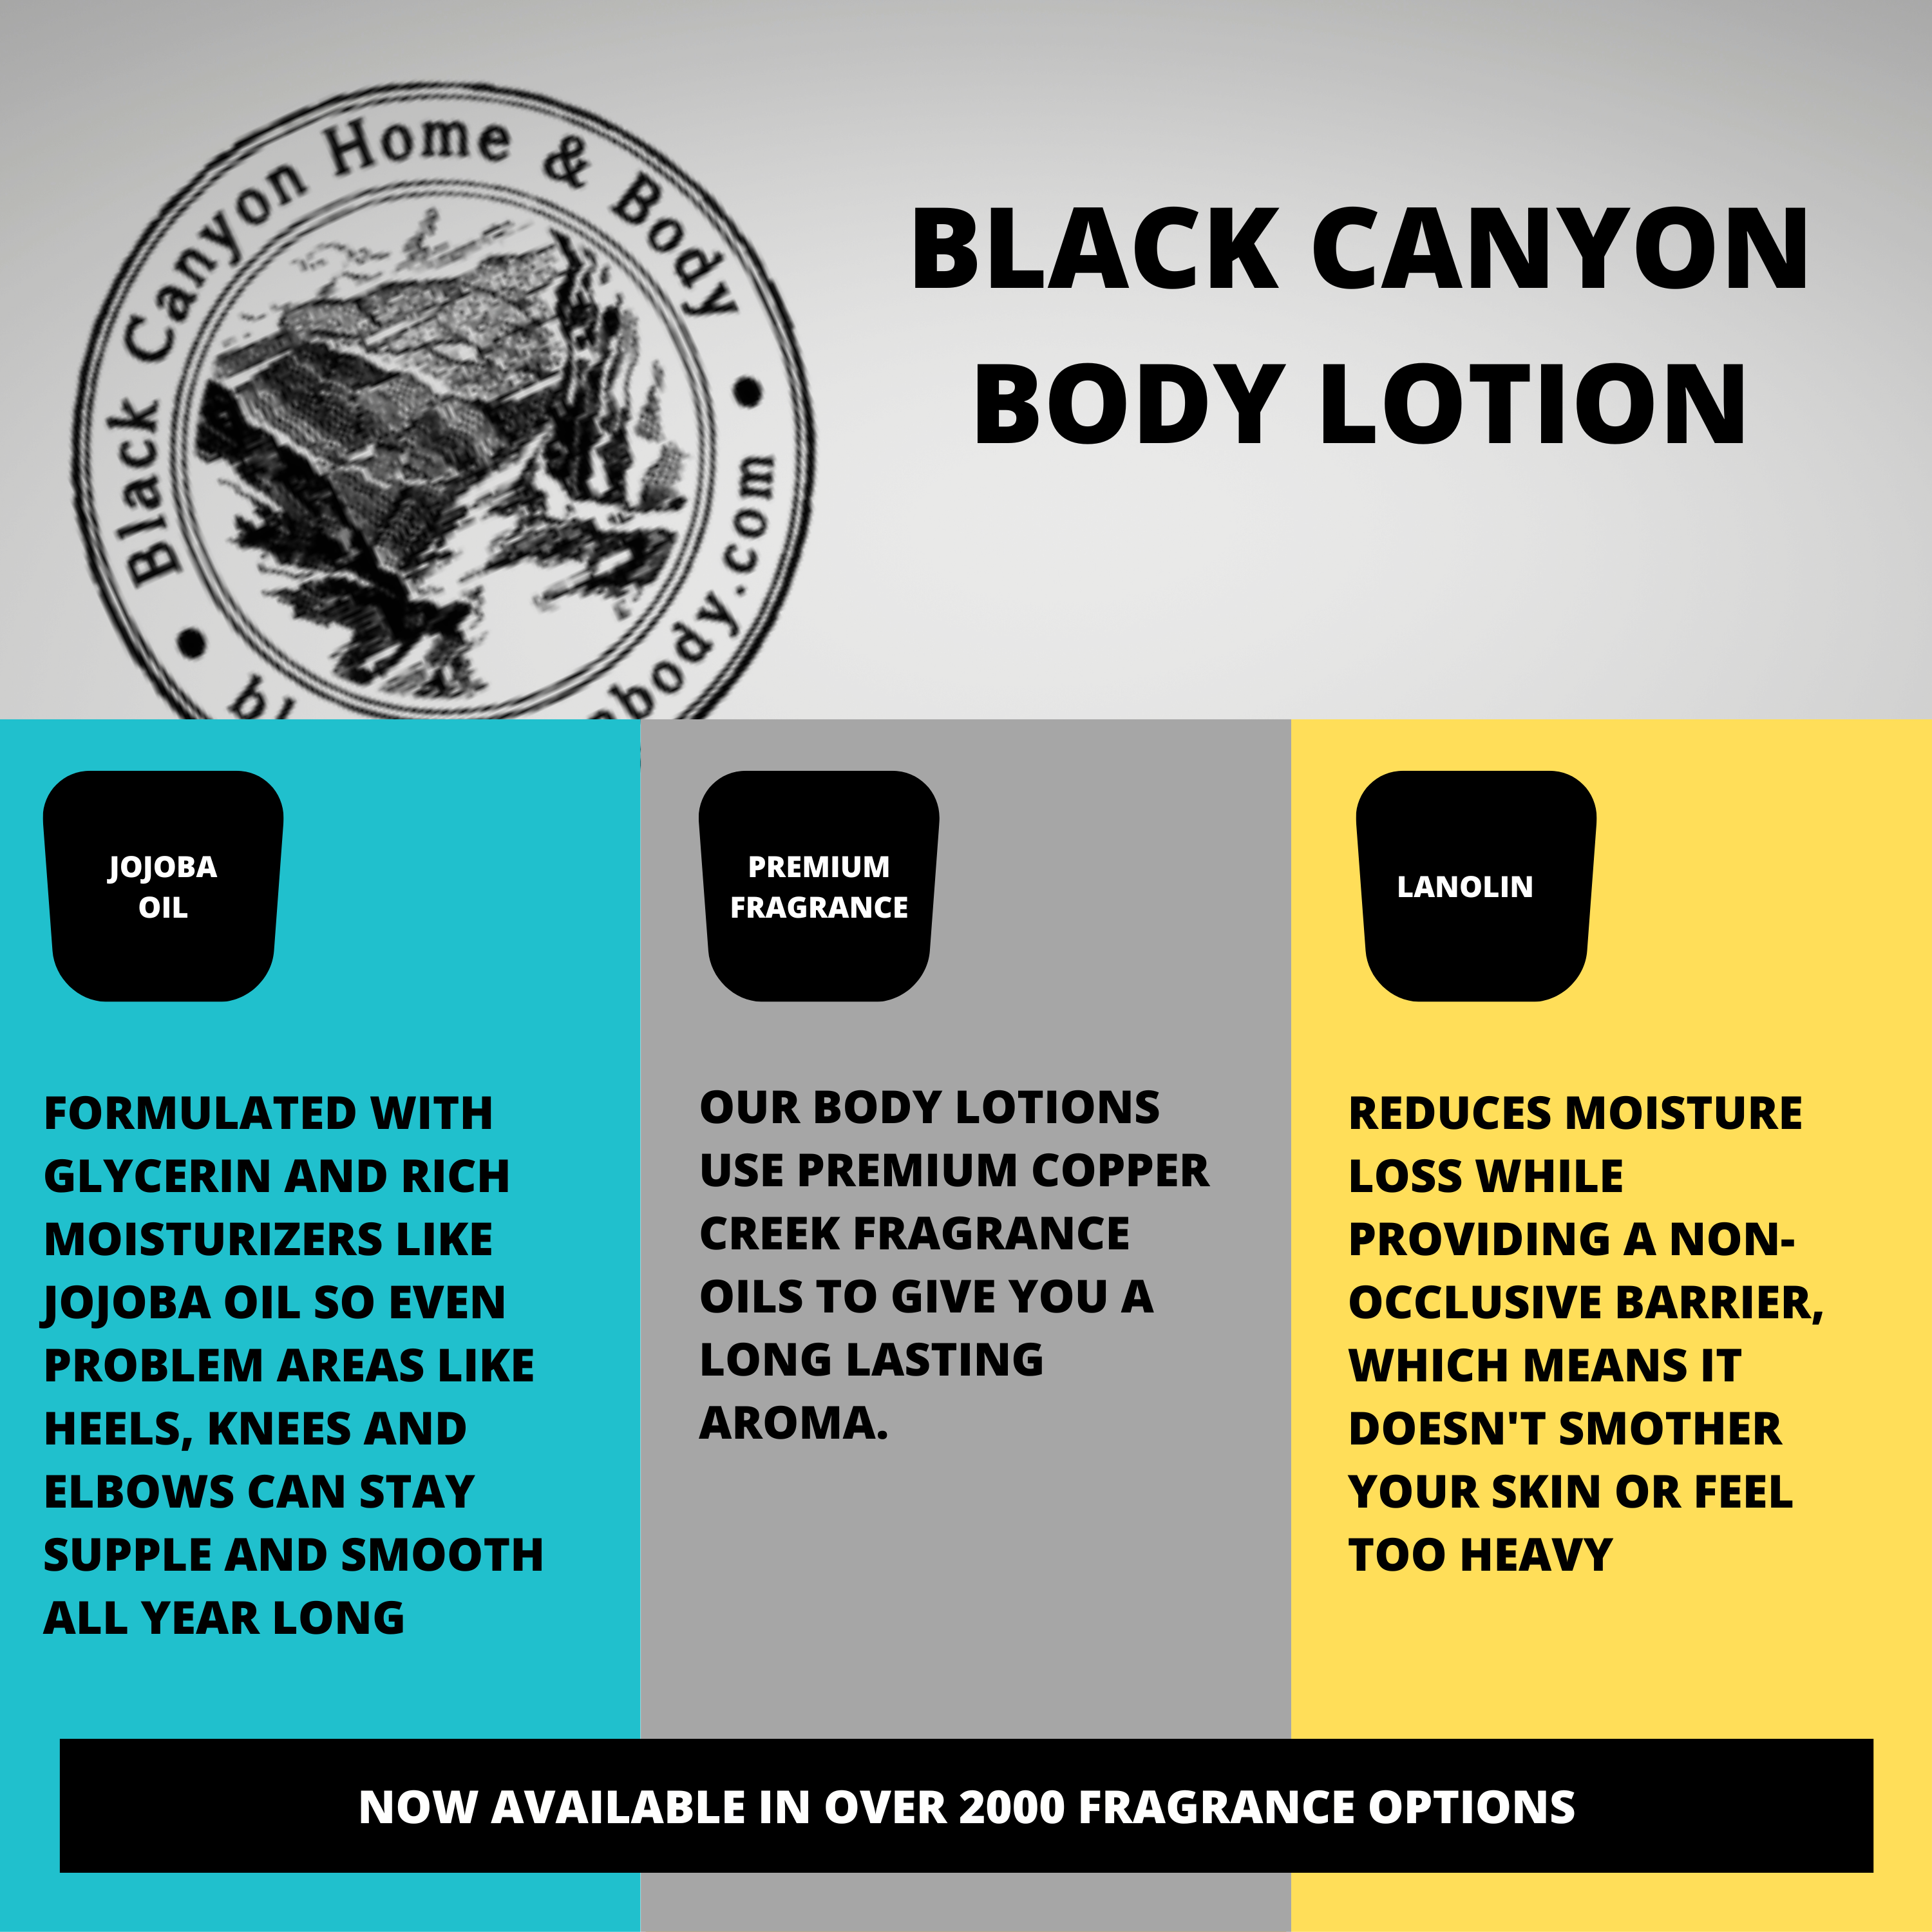 Black Canyon Berry Patch Scented Luxury Body Lotion with Lanolin and Jojoba Oil